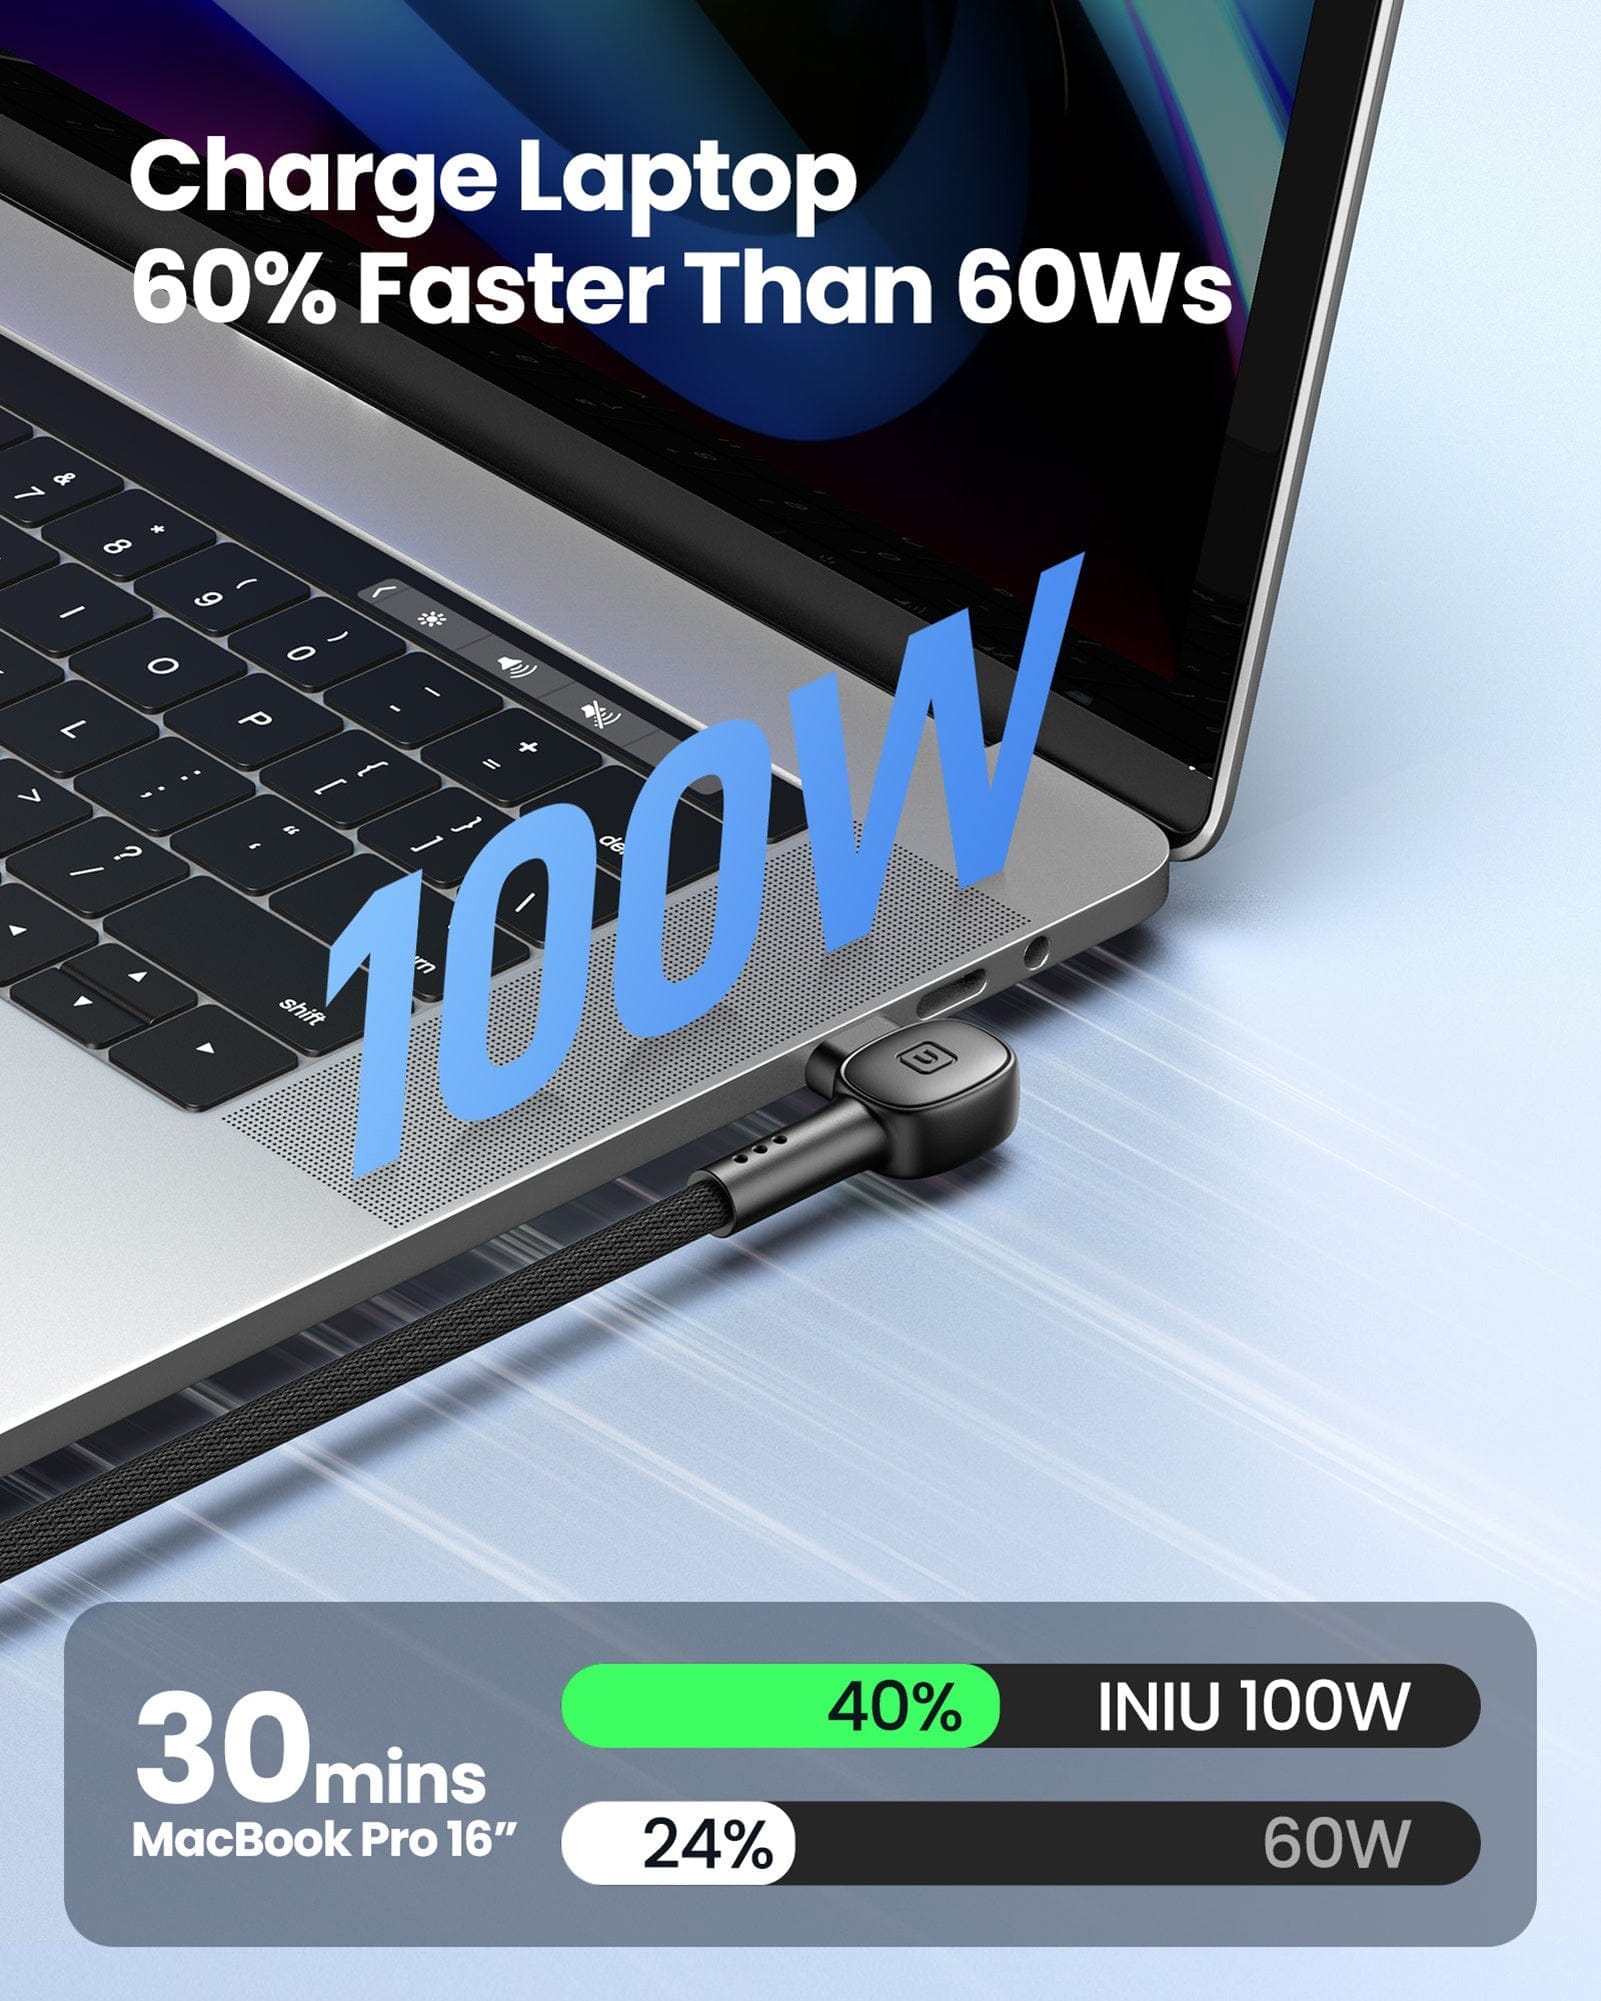 Charge Laptop 60% Faster than 60ws